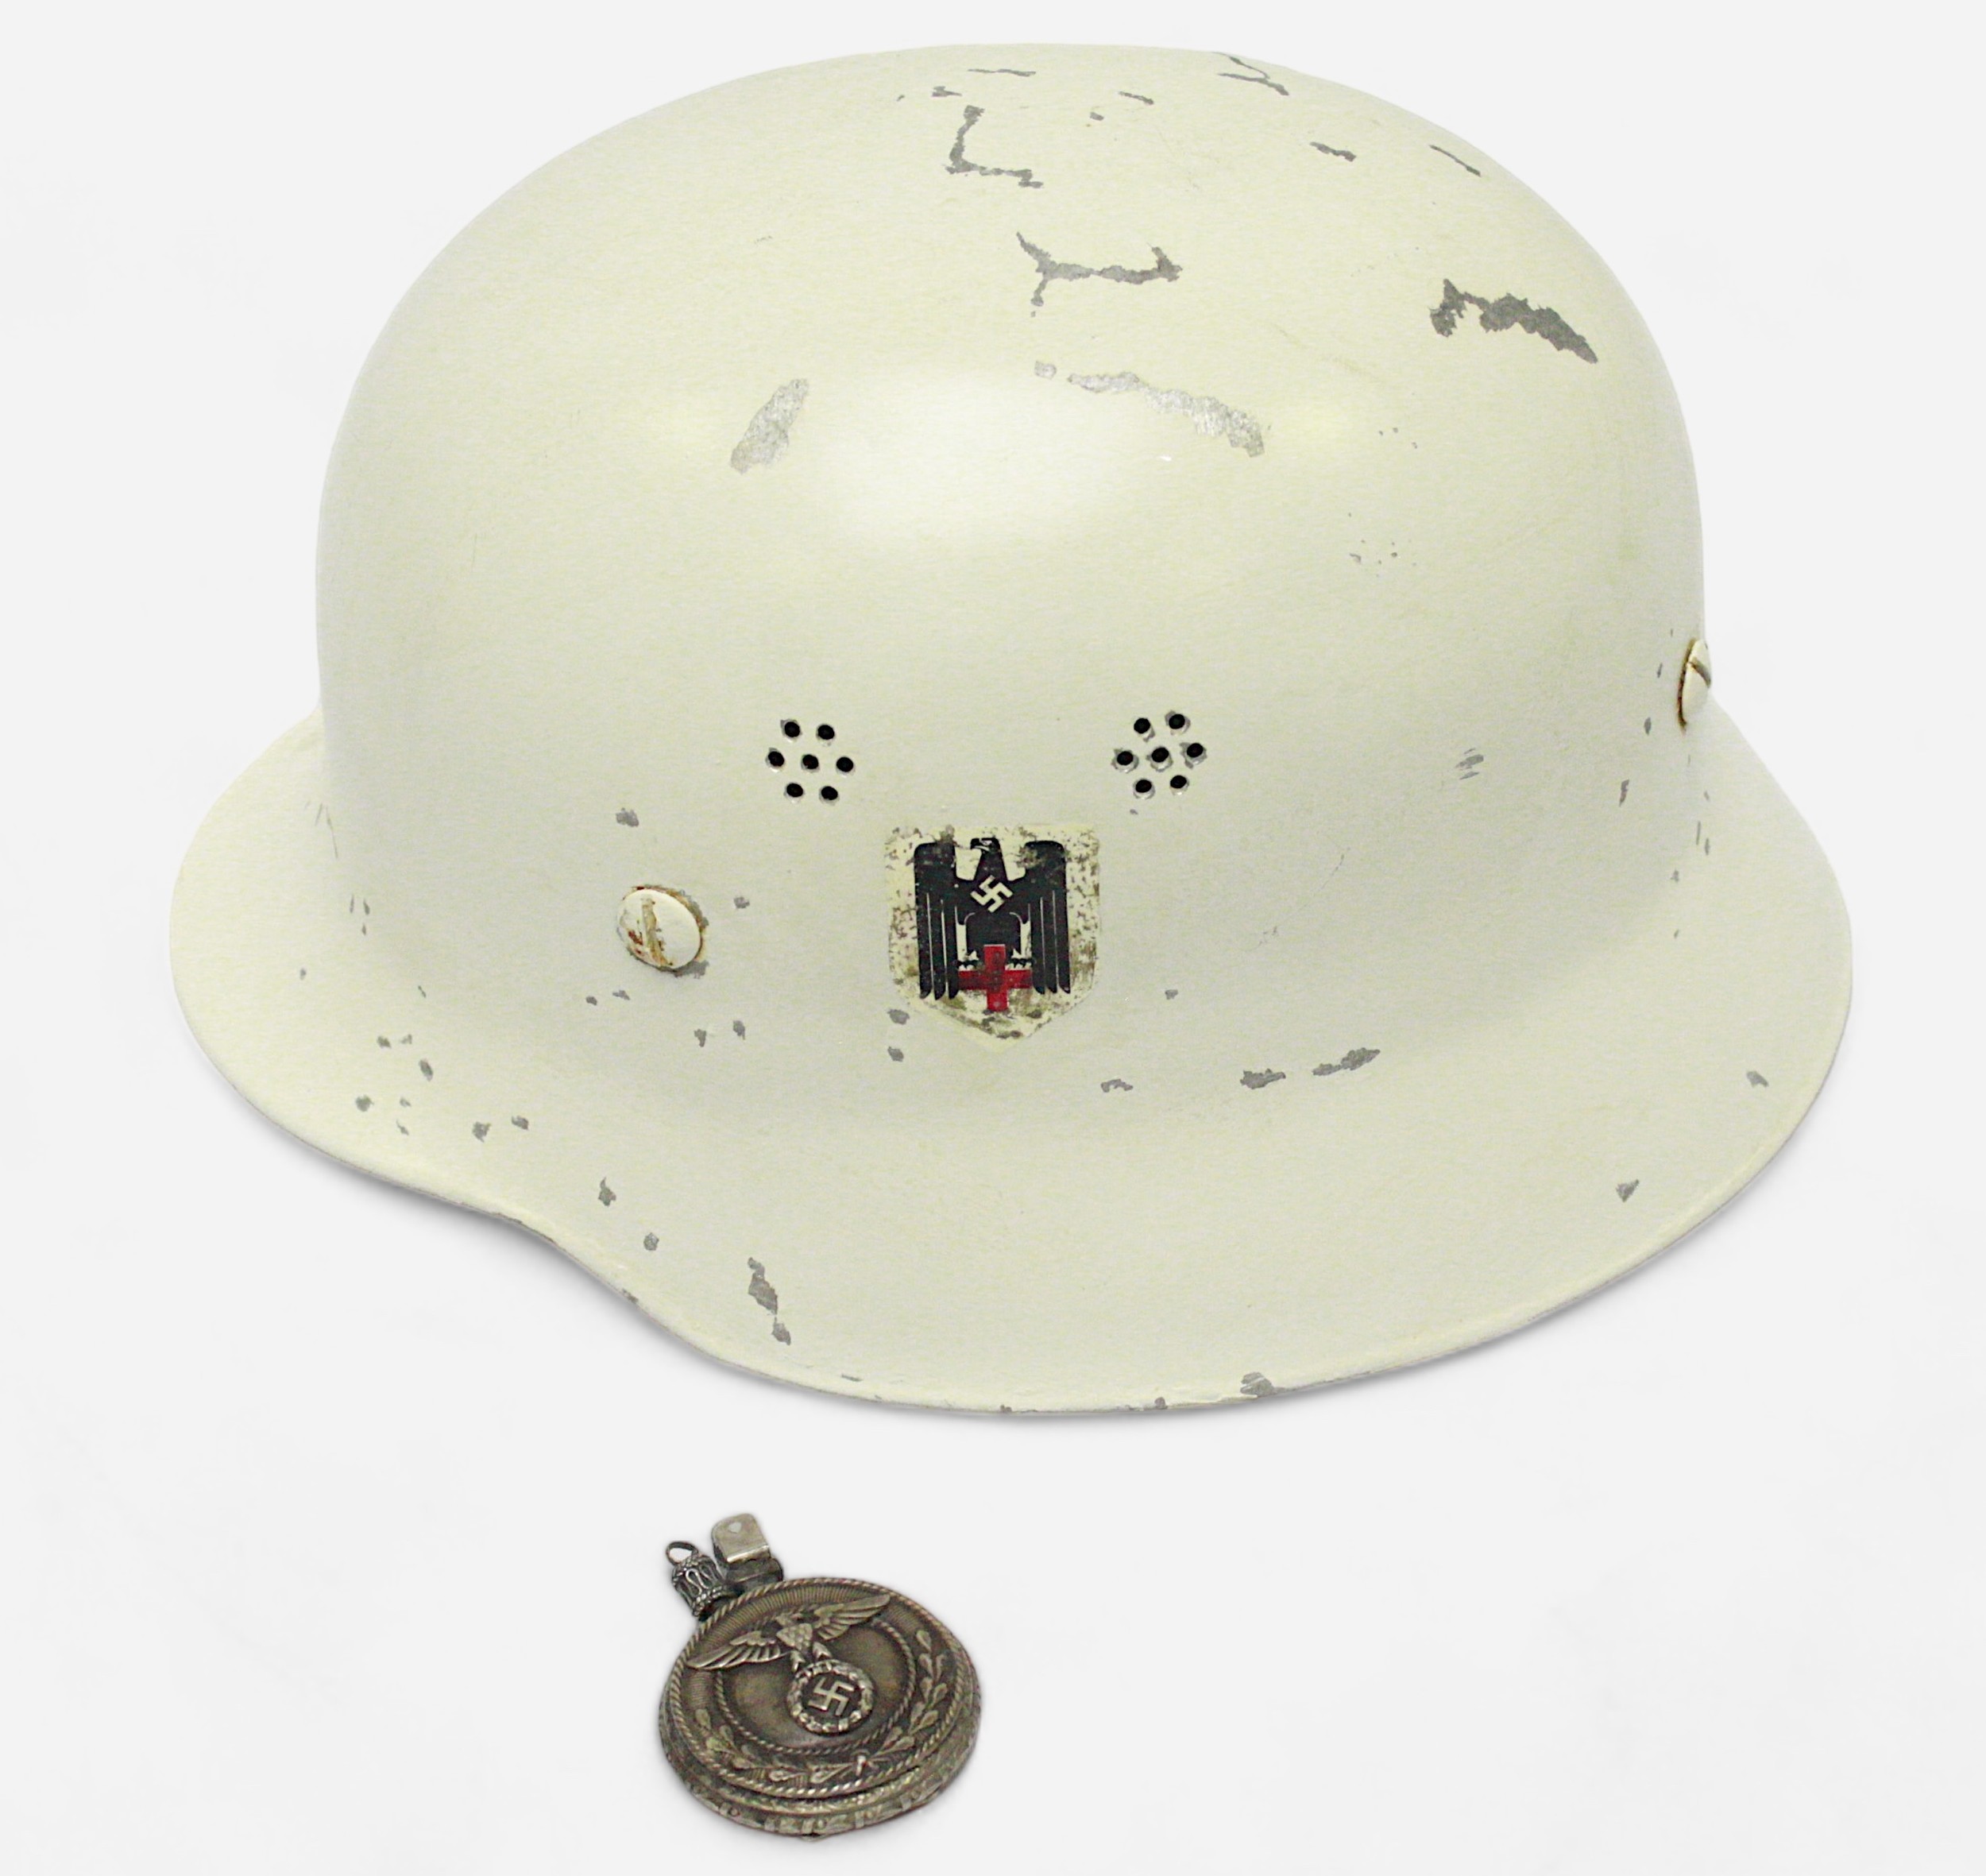 A German M40 helmet, probably for Police or Fire service, finished in white and stamped ‘Din 14940’,